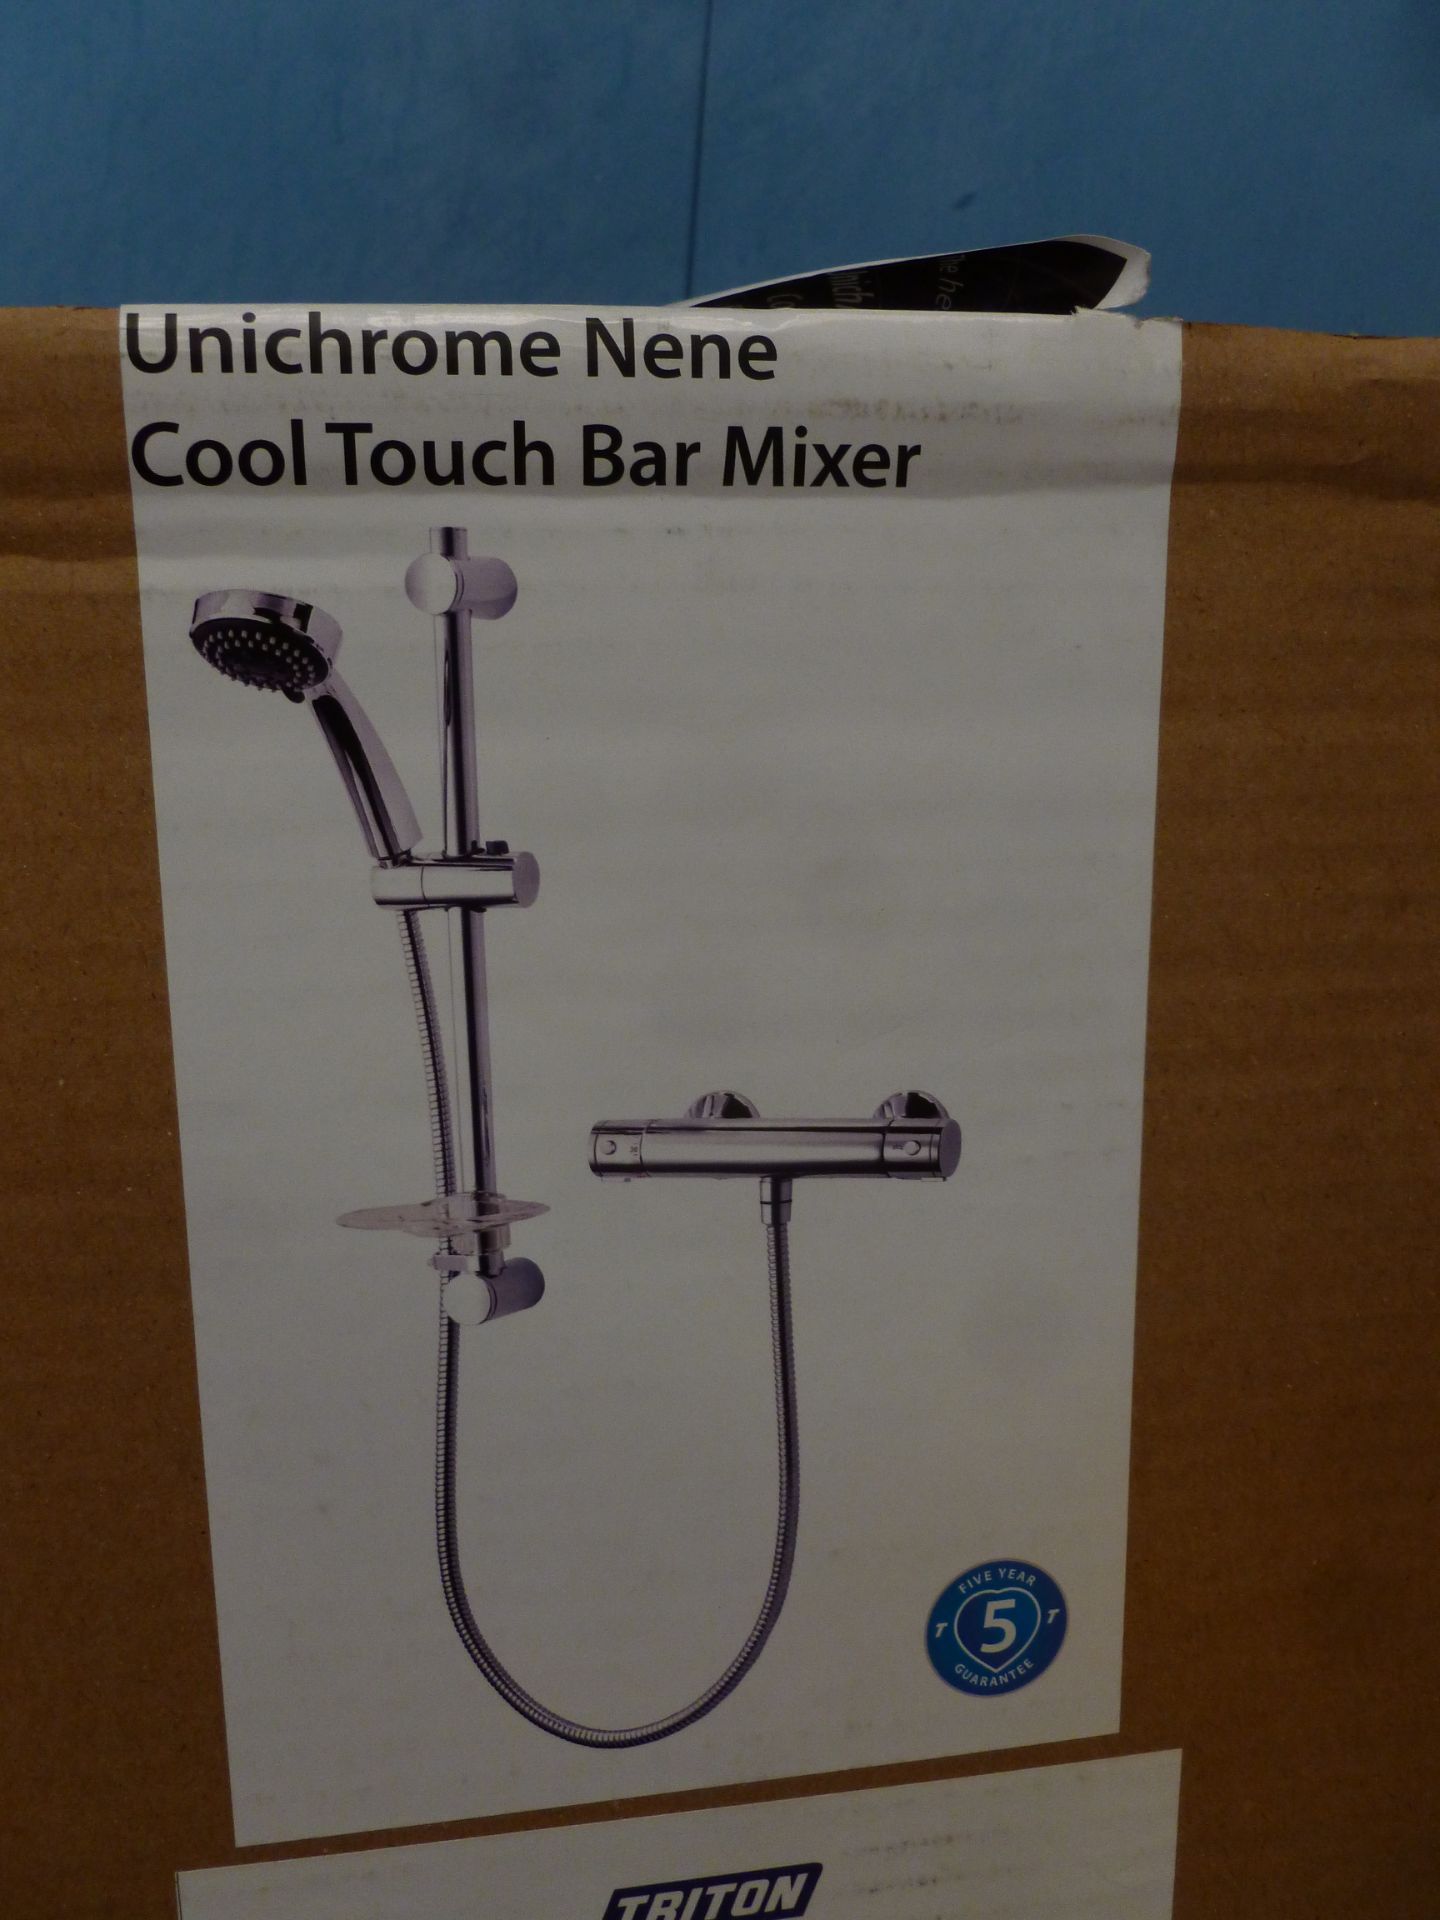 Triton Unichrome Nene Cool Touch Bar Thermostatic Mixer Shower with Chrome Riser Rail. New, sealed